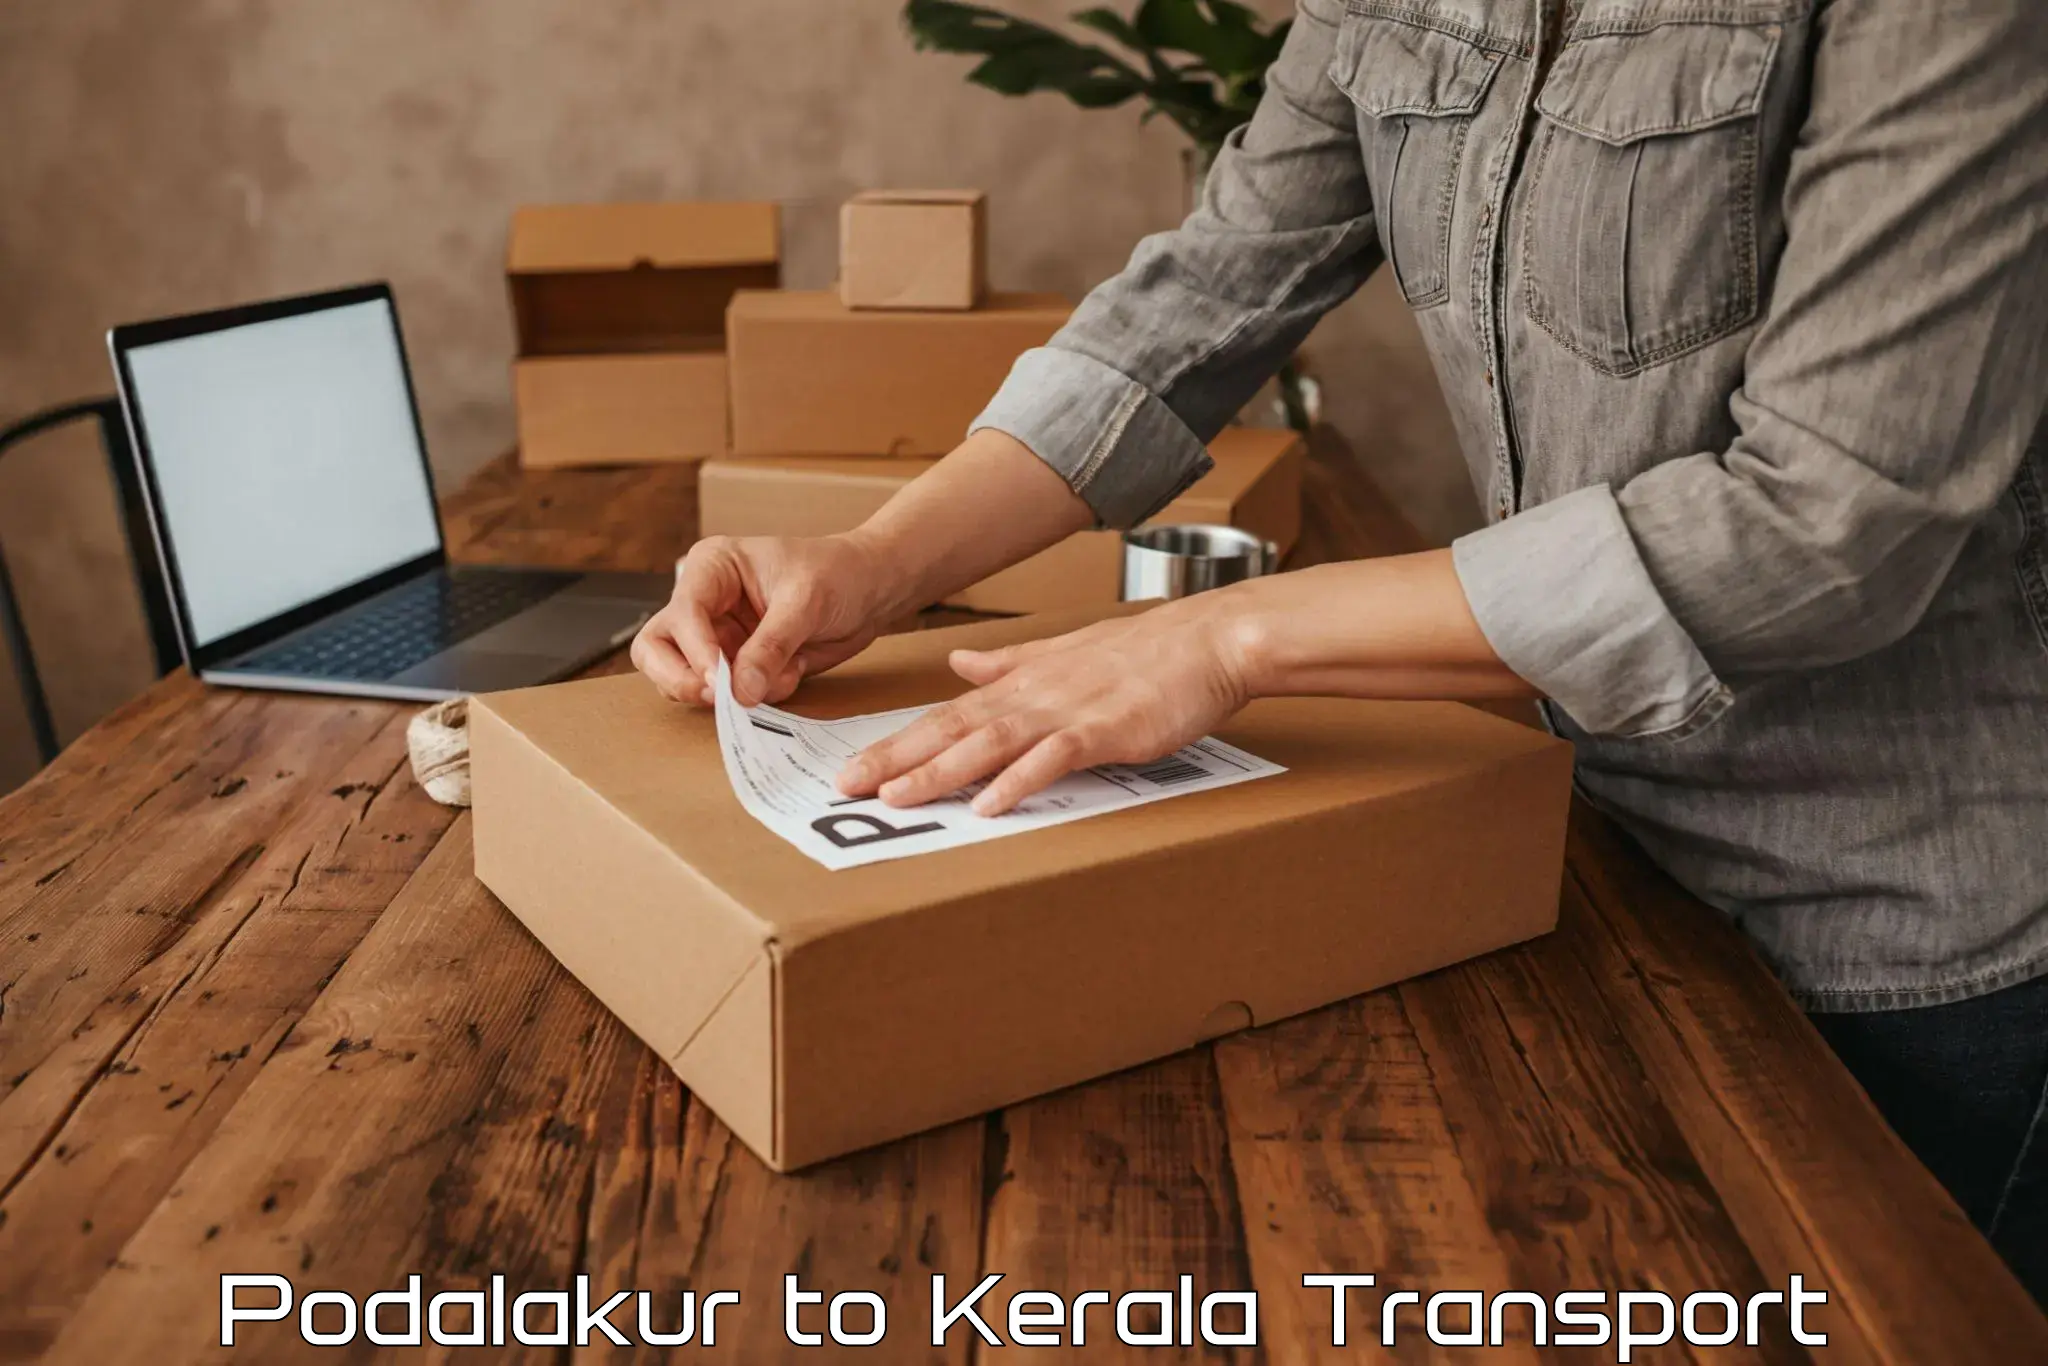 Nearby transport service Podalakur to Kannur